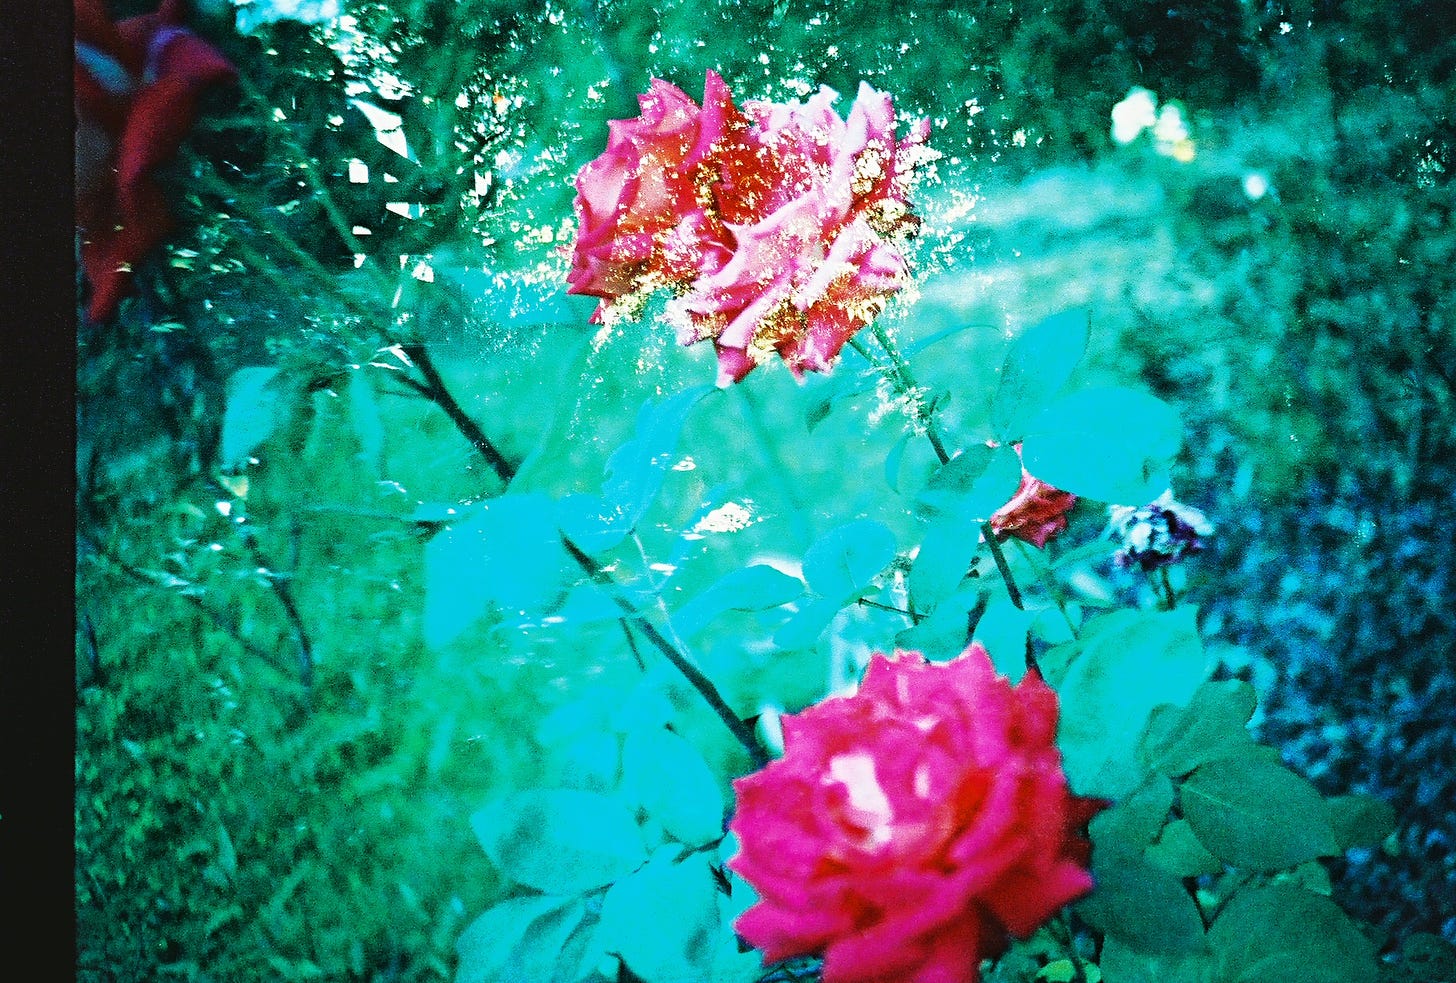 Bright pink roses, slightly grainy from double exposure.